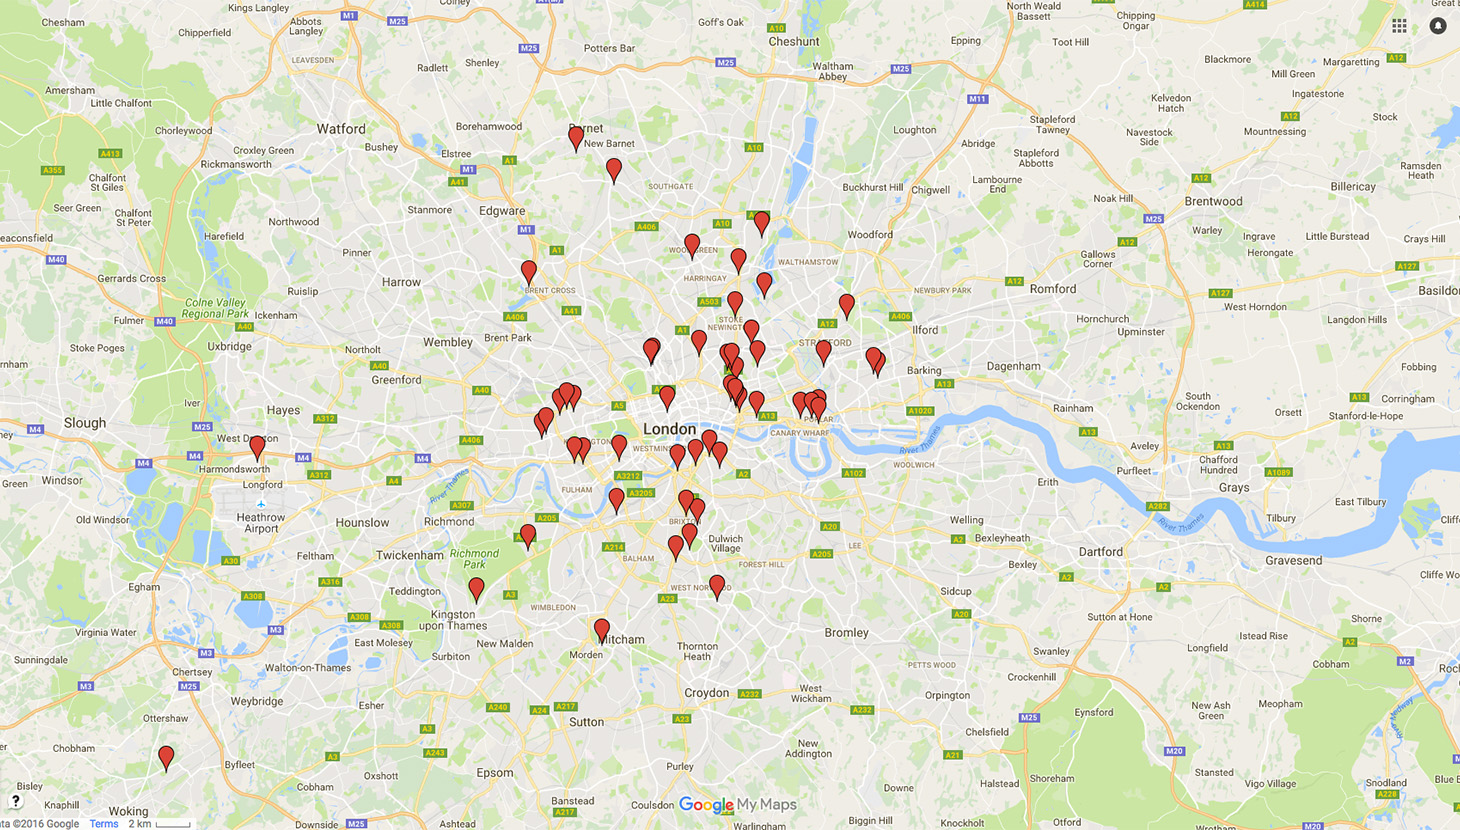 Some of London's housing and gentrification campaigns, including Save Soho, Aylesbury Estate Occupation, Save Earl's Court, Hands Off Knights Walk, Save Norton Folgate, and many others. Map ph. Googlemaps